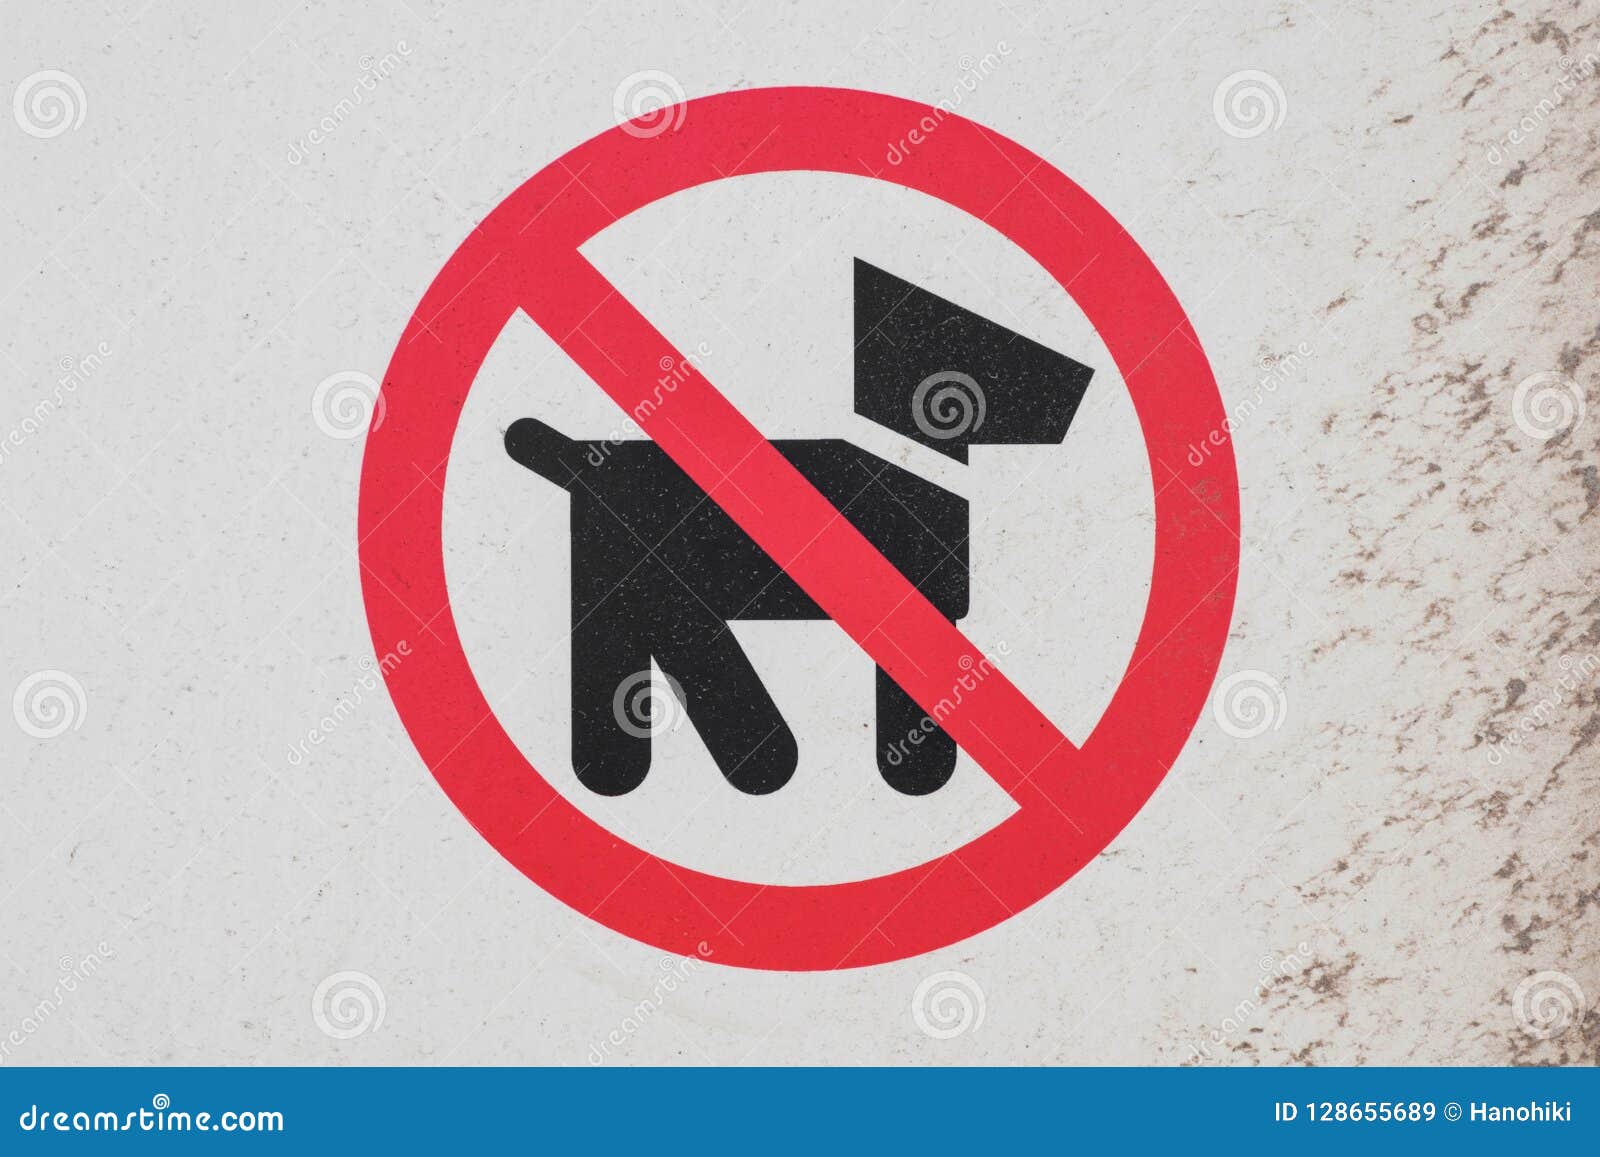 no dogs sign - dogs not allowed , pictogram